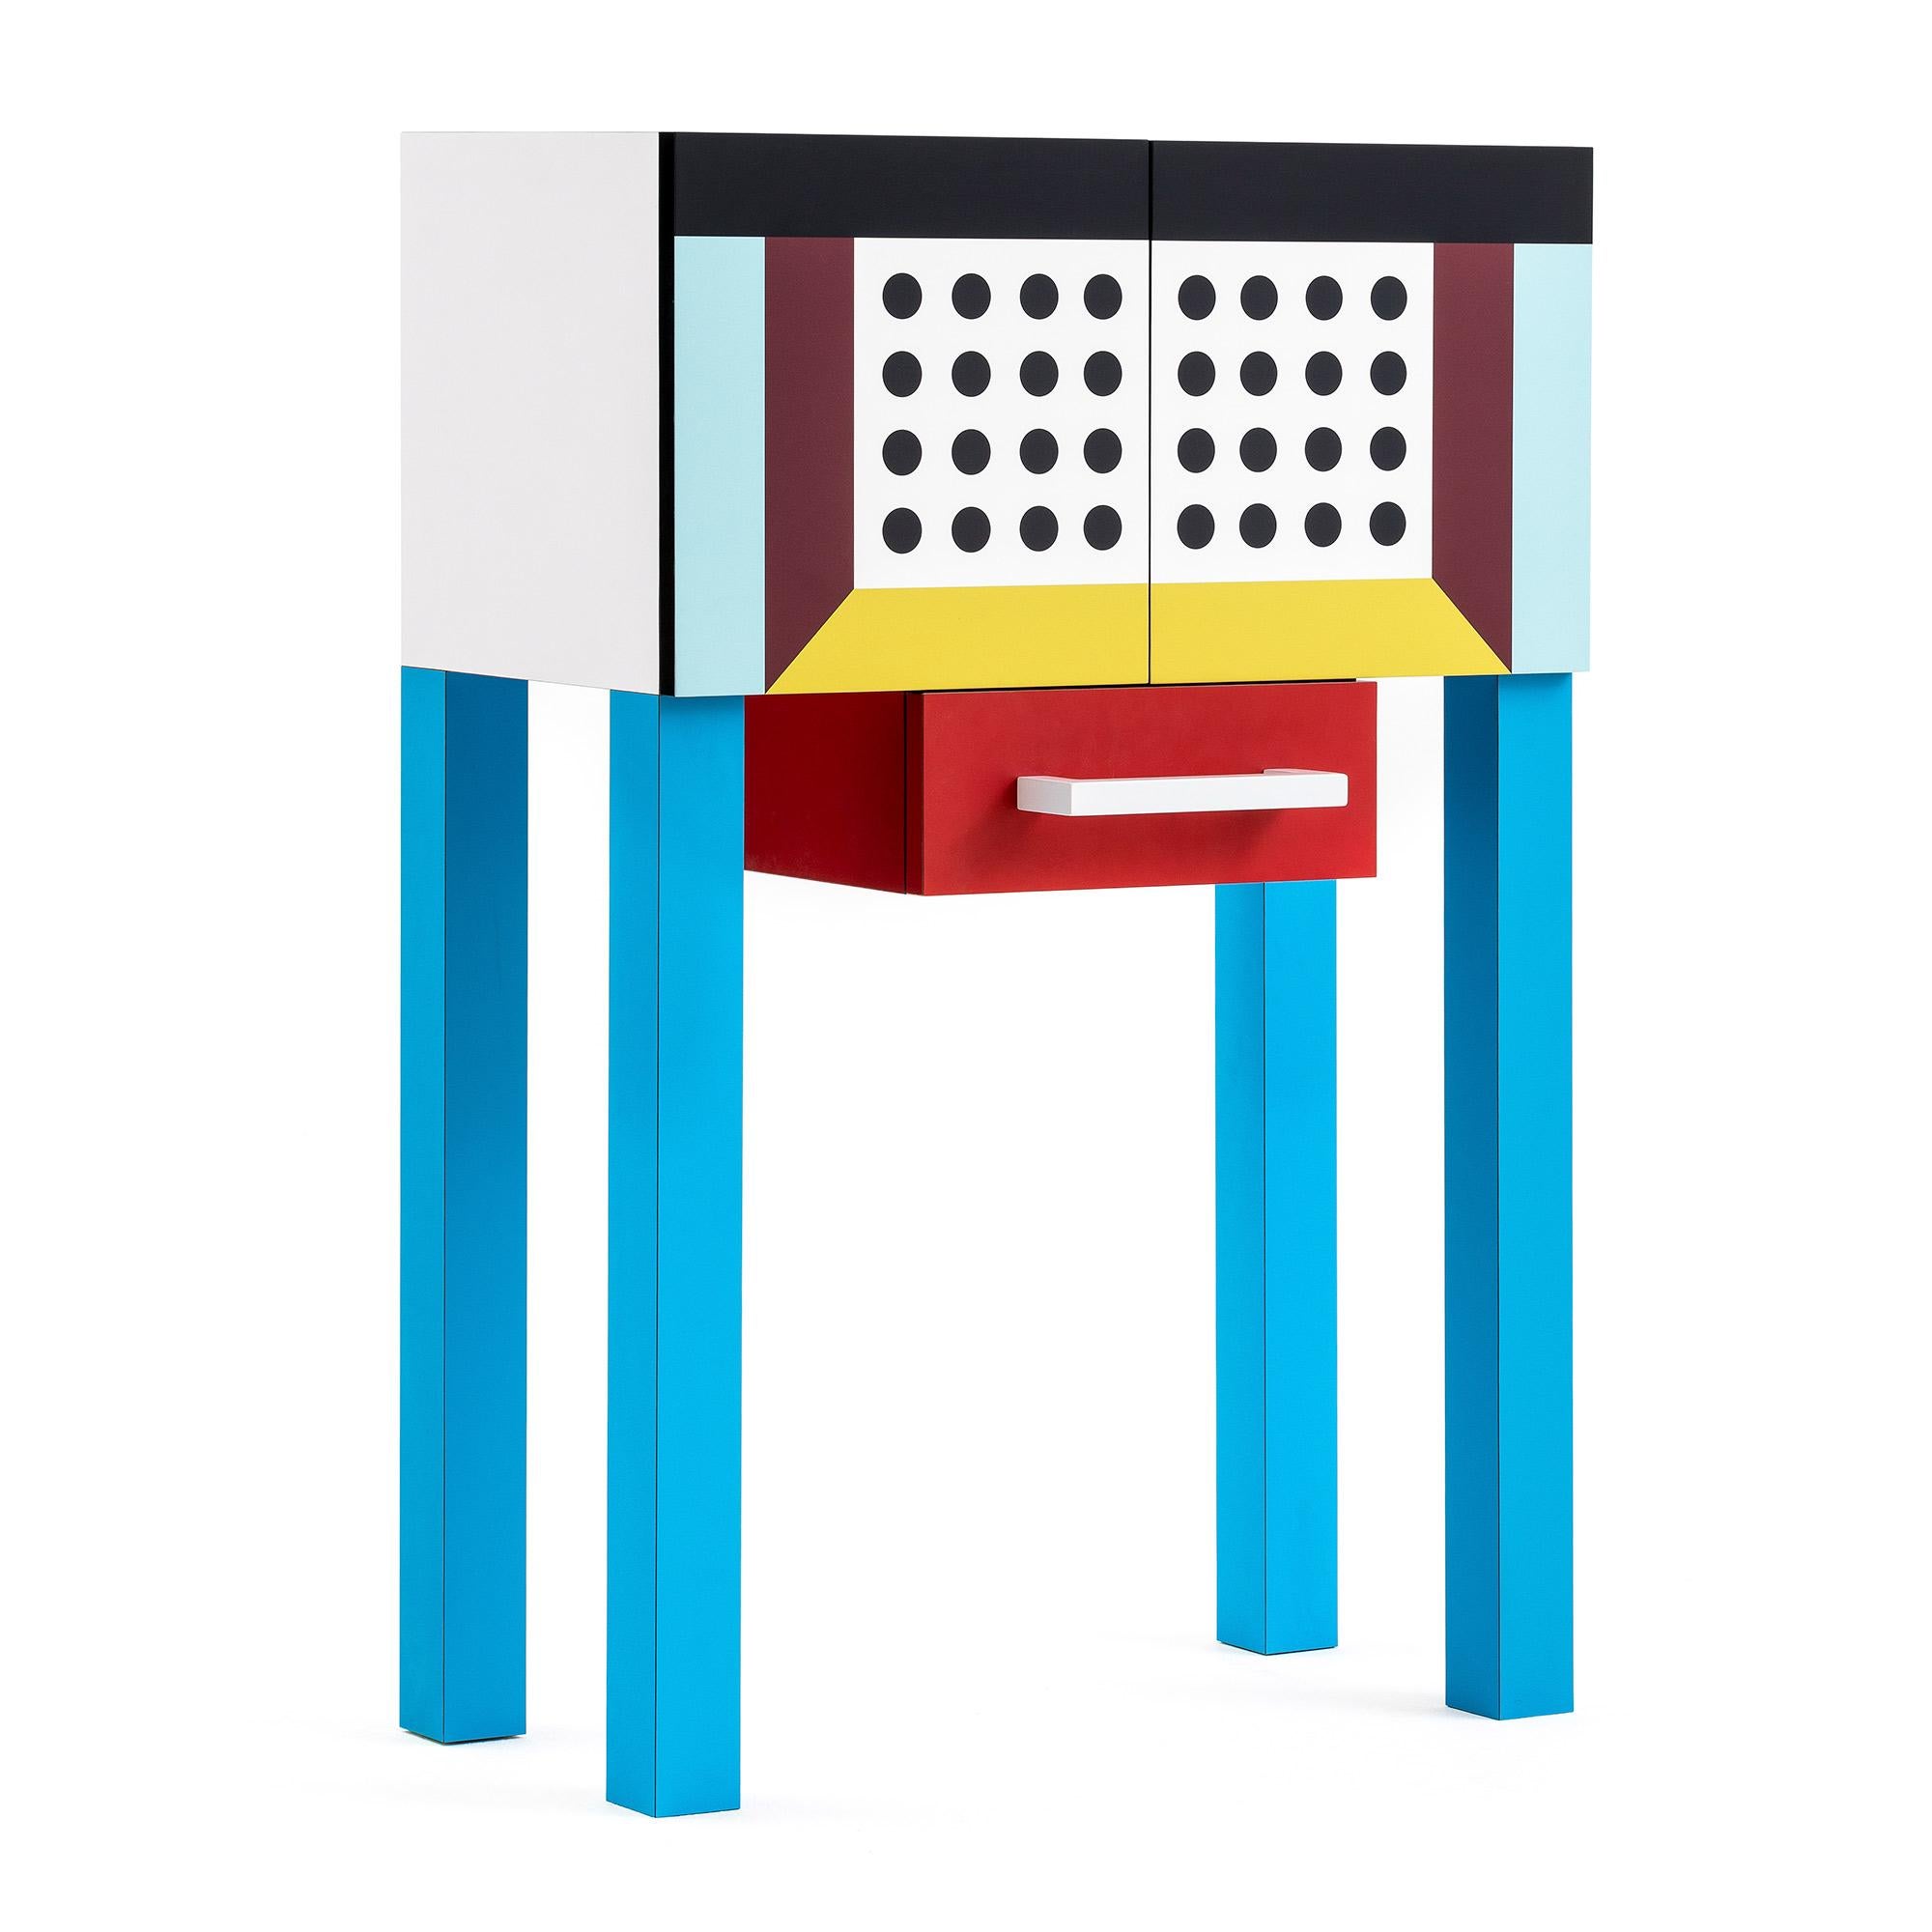 QUARZO cupboard in wood by Nathalie Du Pasquier by Post Design collection/Memphis

The product is purchased with authenticity certificate and guarantee stamp.

Additional Information:
Cupboard with draw in painted wood, structure and top in